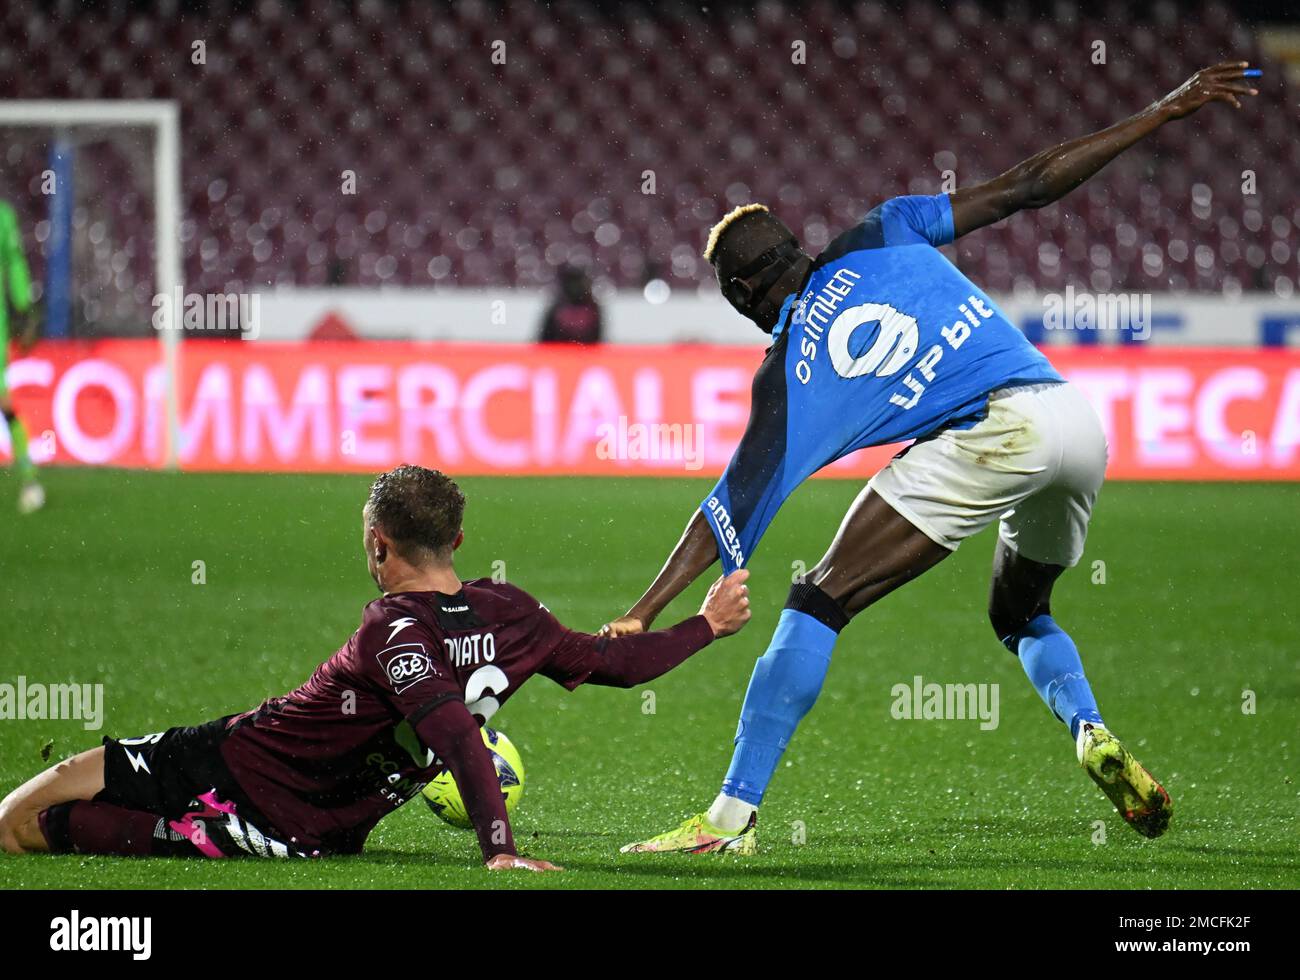 Salerno, Italy. 21st Jan, 2023. Napoli's Victor Osimhen (R) vies with Salernitana's Matteo Lovato during a Serie A football match in Salerno, Italy, Jan. 21, 2023. Credit: Alberto Lingria/Xinhua/Alamy Live News Stock Photo